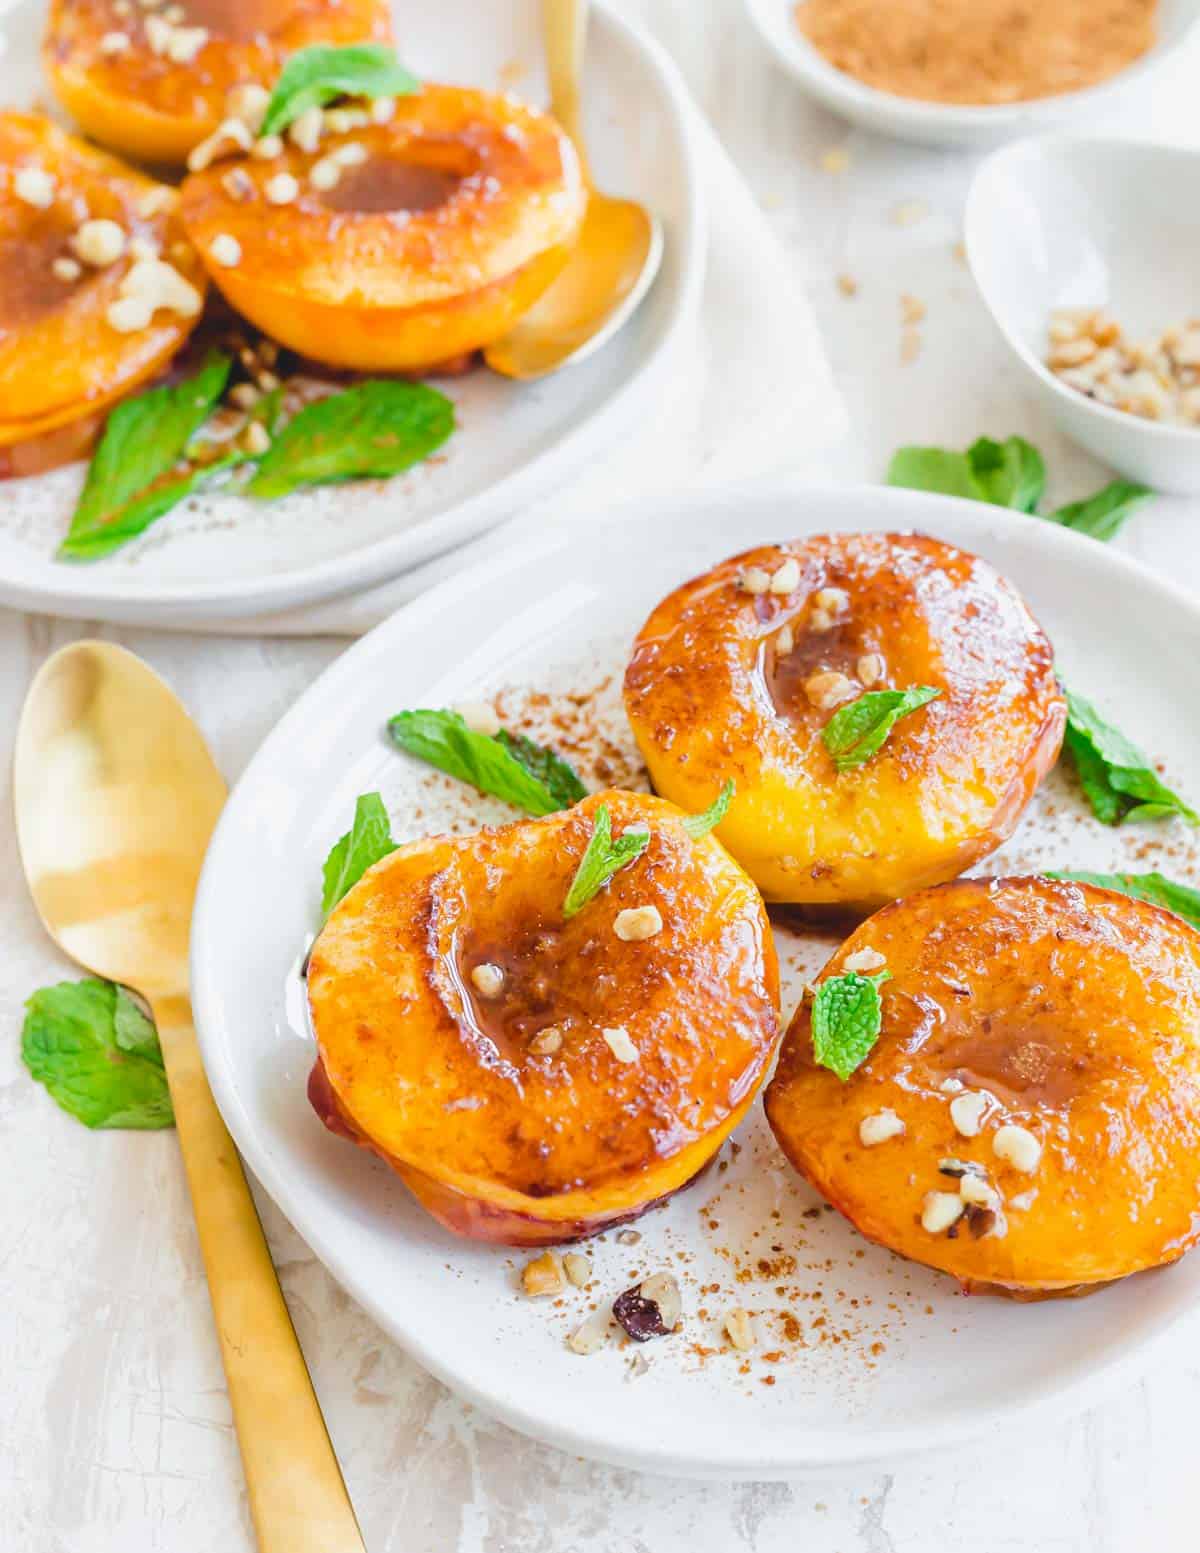 Air fryer peaches topped with cinnamon sugar, chopped walnuts and fresh mint on a white plate.